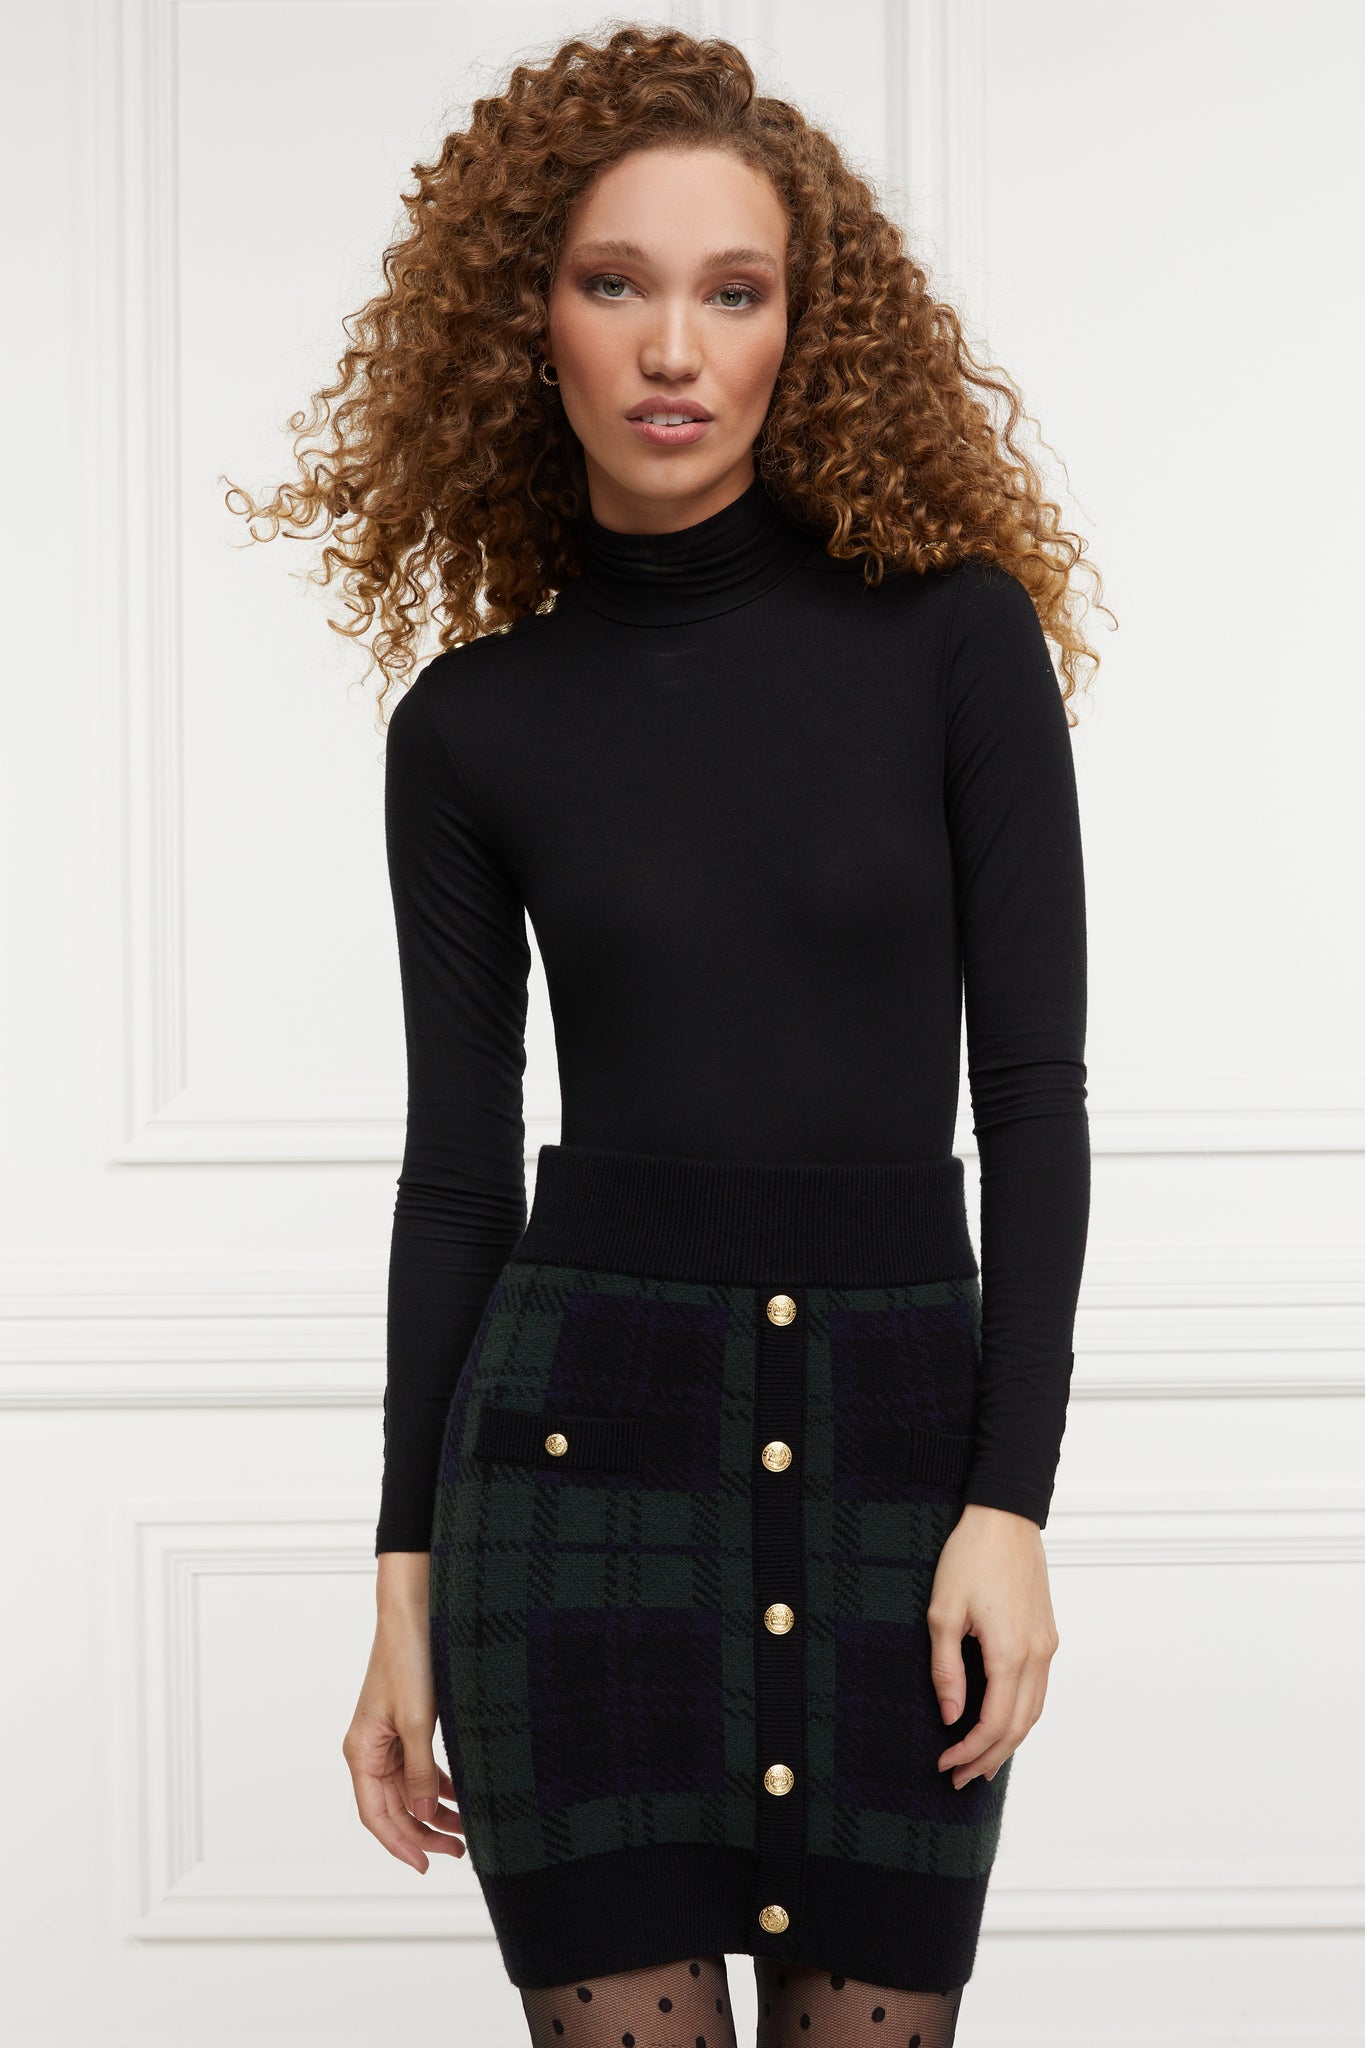 womens knitted mini skirt in green back and navy blackwatch pattern with contrast eibbed waistband centre front panel welt pockets and hem with gold button detail down the front and on each pocket